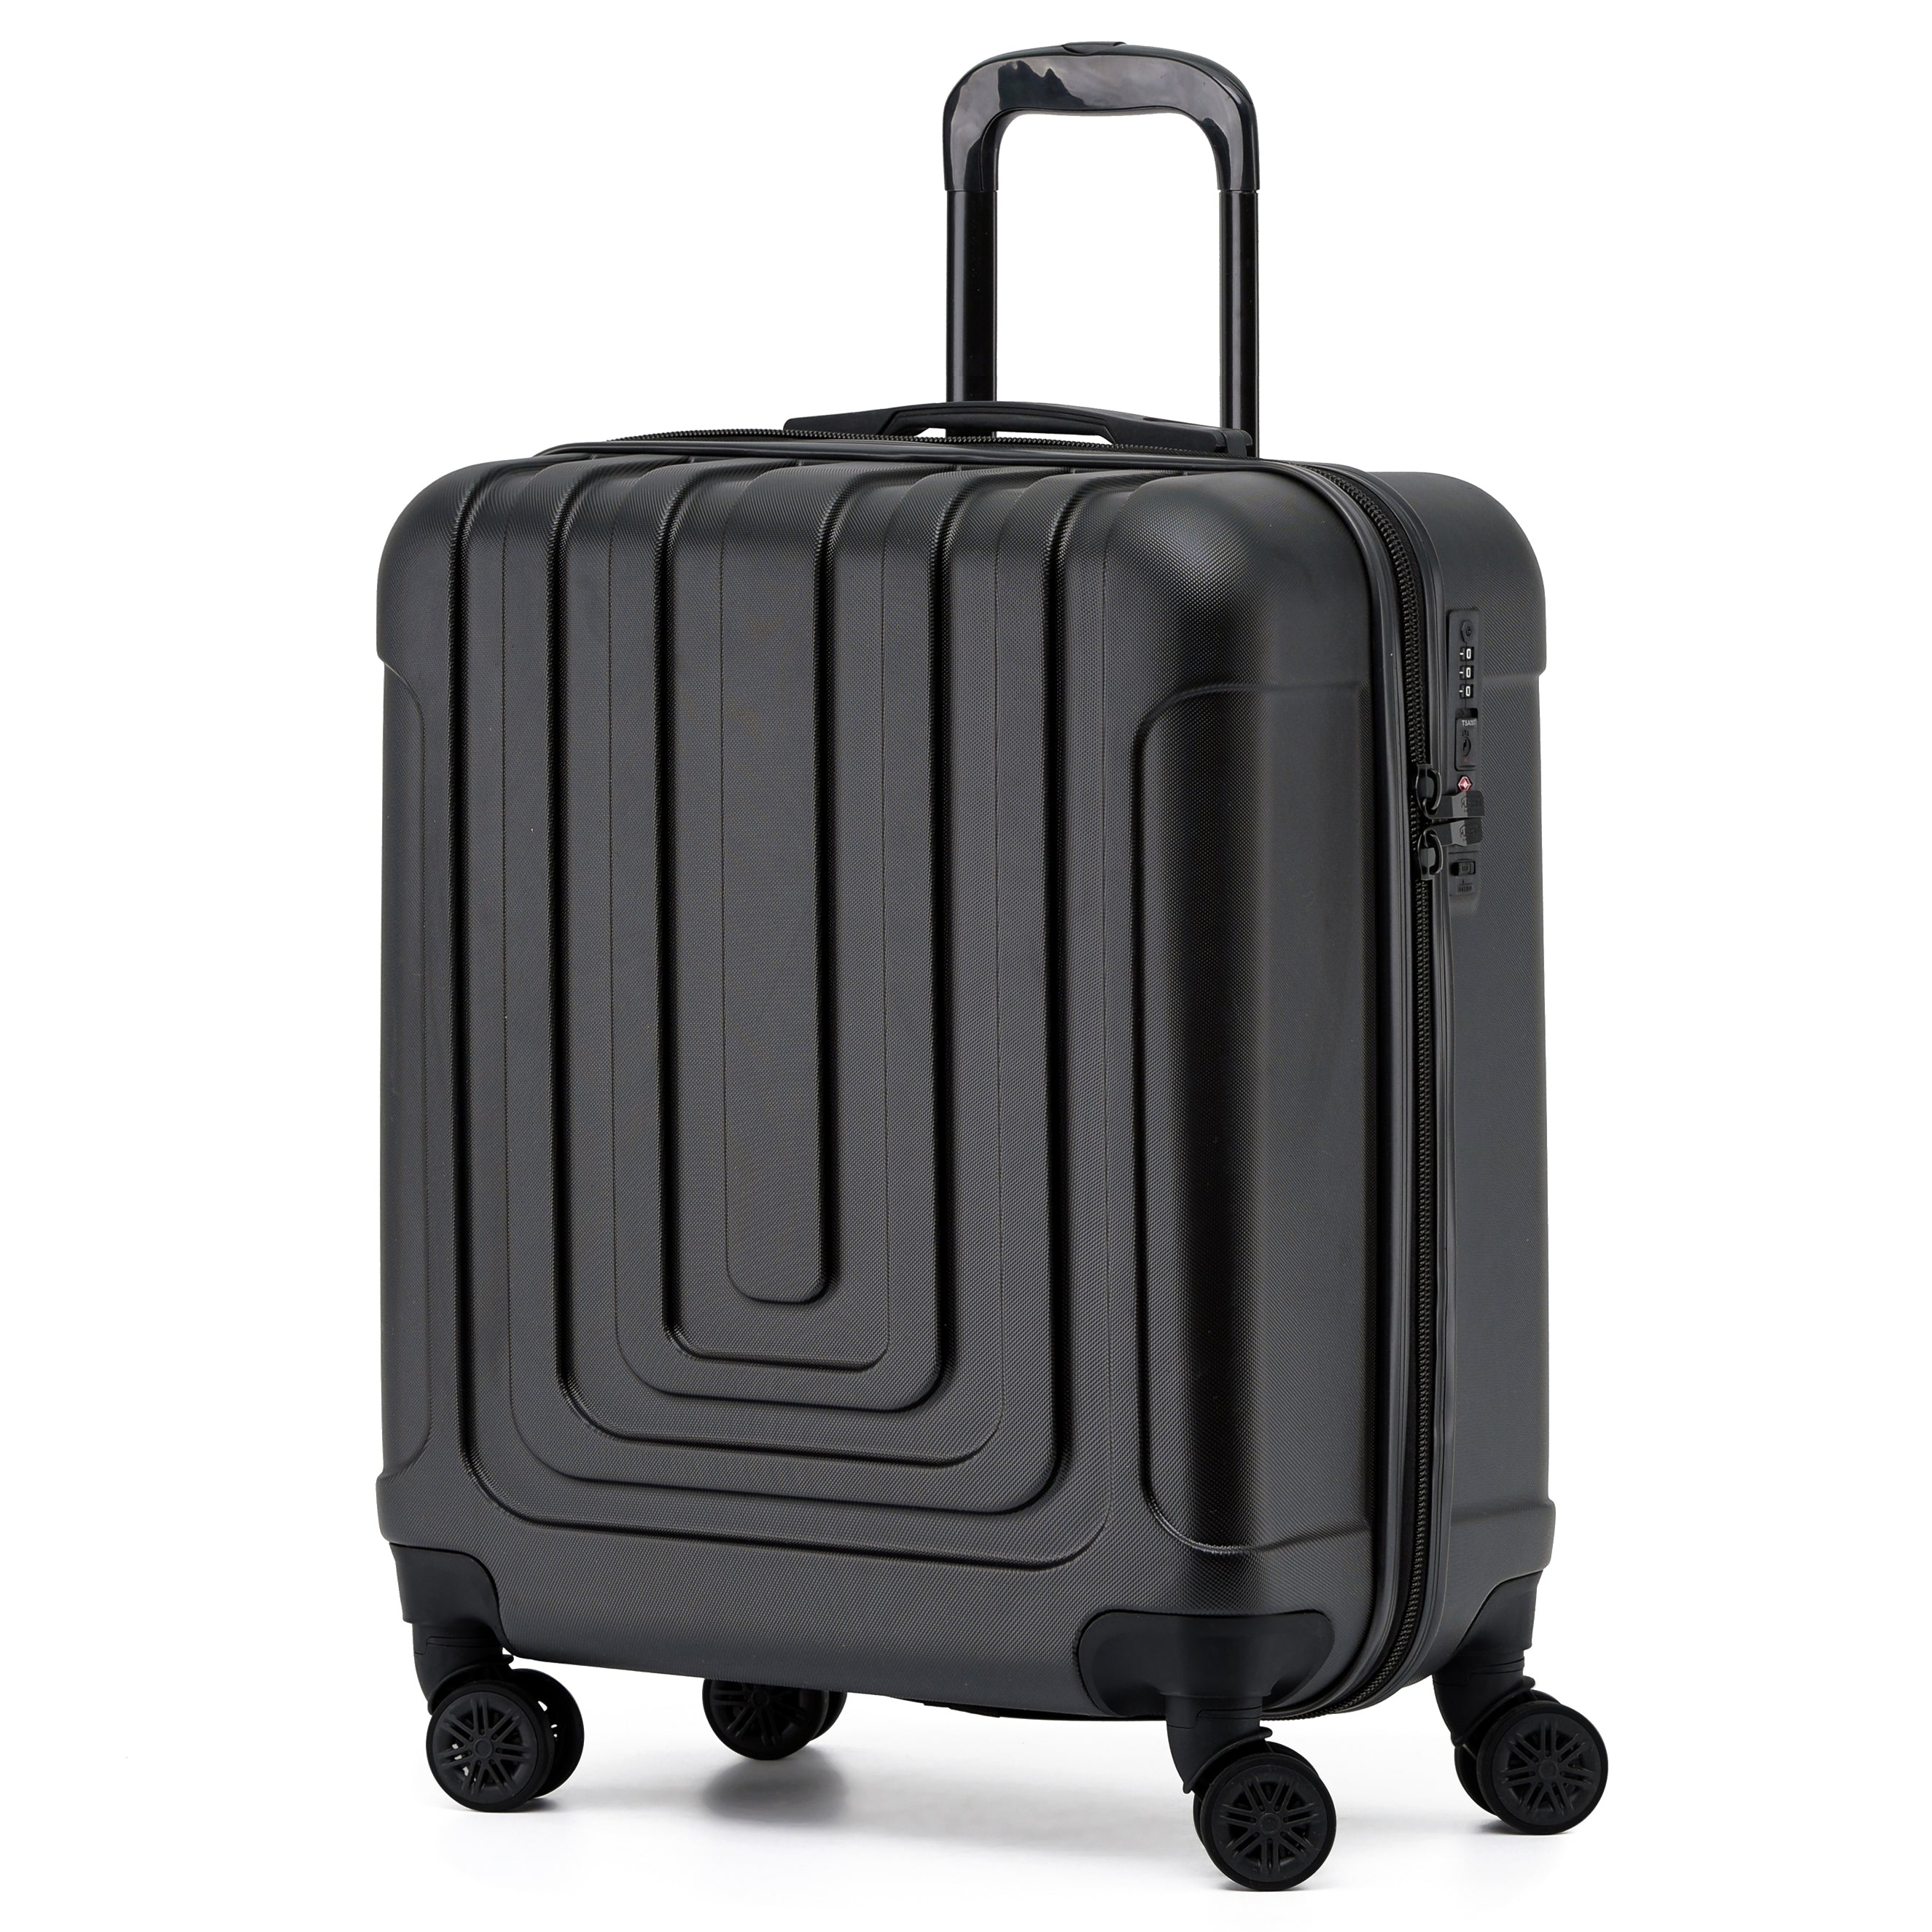 Flight Knight Lightweight 4 Wheel ABS Hard Case Suitcases Maximum For  Lufthansa - Cabin Charcoal FK03_CHAR_S